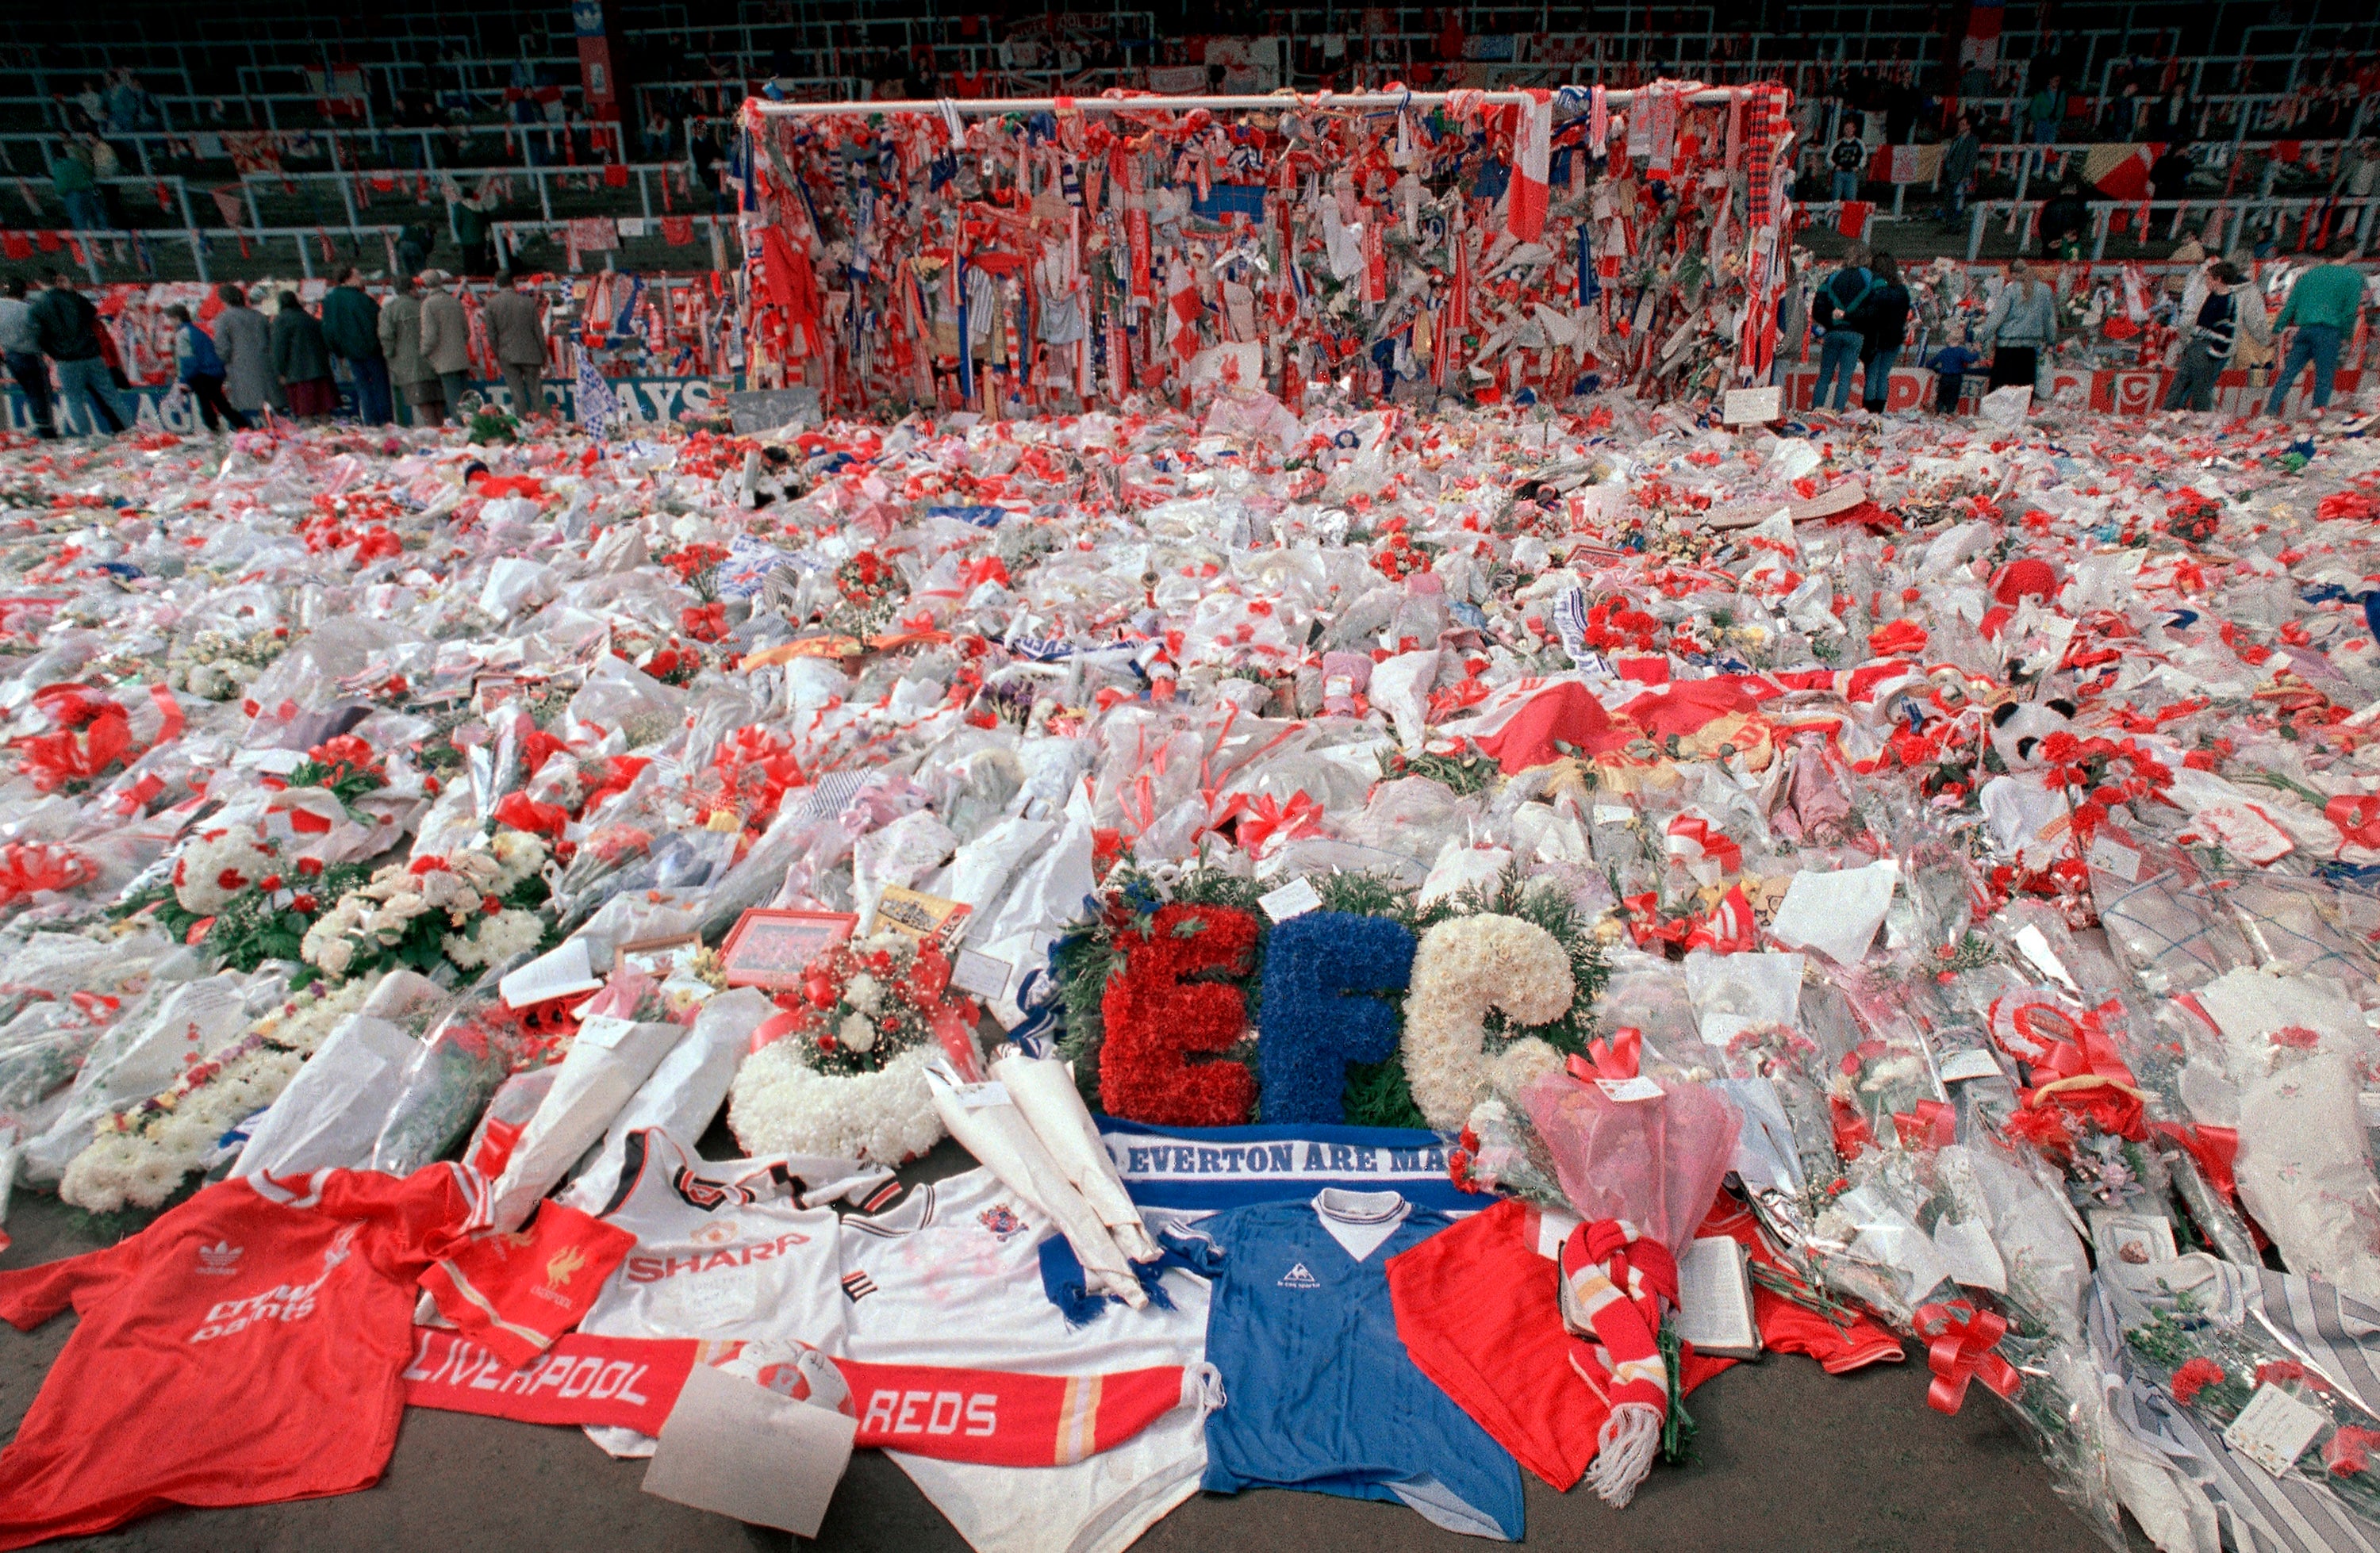 Flower tributes cover the ‘Kop’ at Anfield in Liverpool, on 17 April 1989